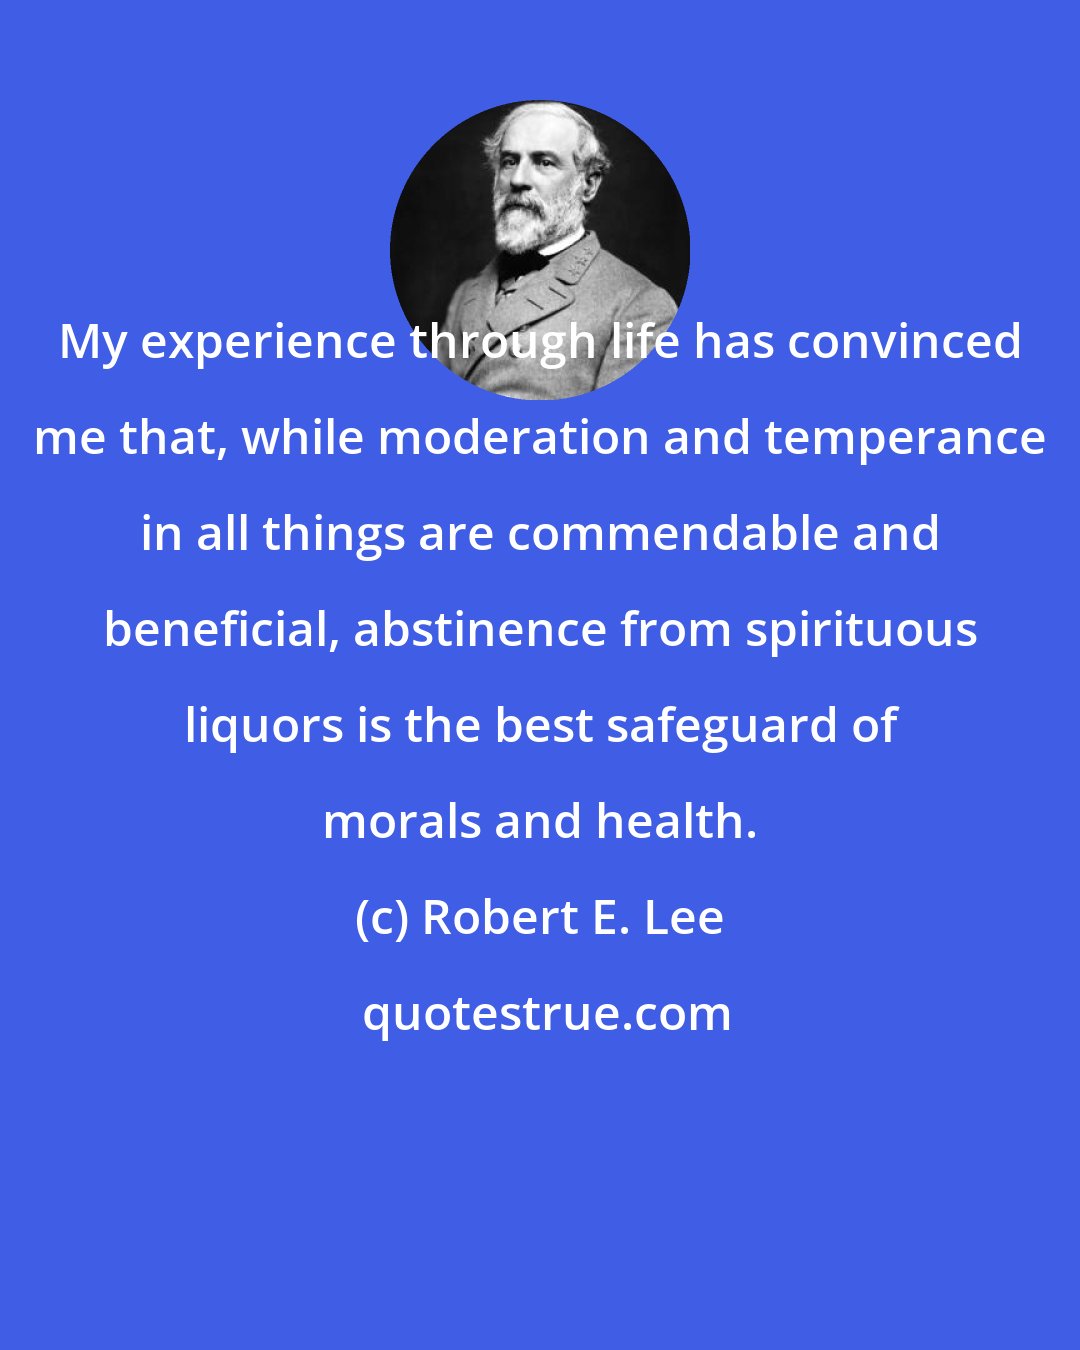 Robert E. Lee: My experience through life has convinced me that, while moderation and temperance in all things are commendable and beneficial, abstinence from spirituous liquors is the best safeguard of morals and health.